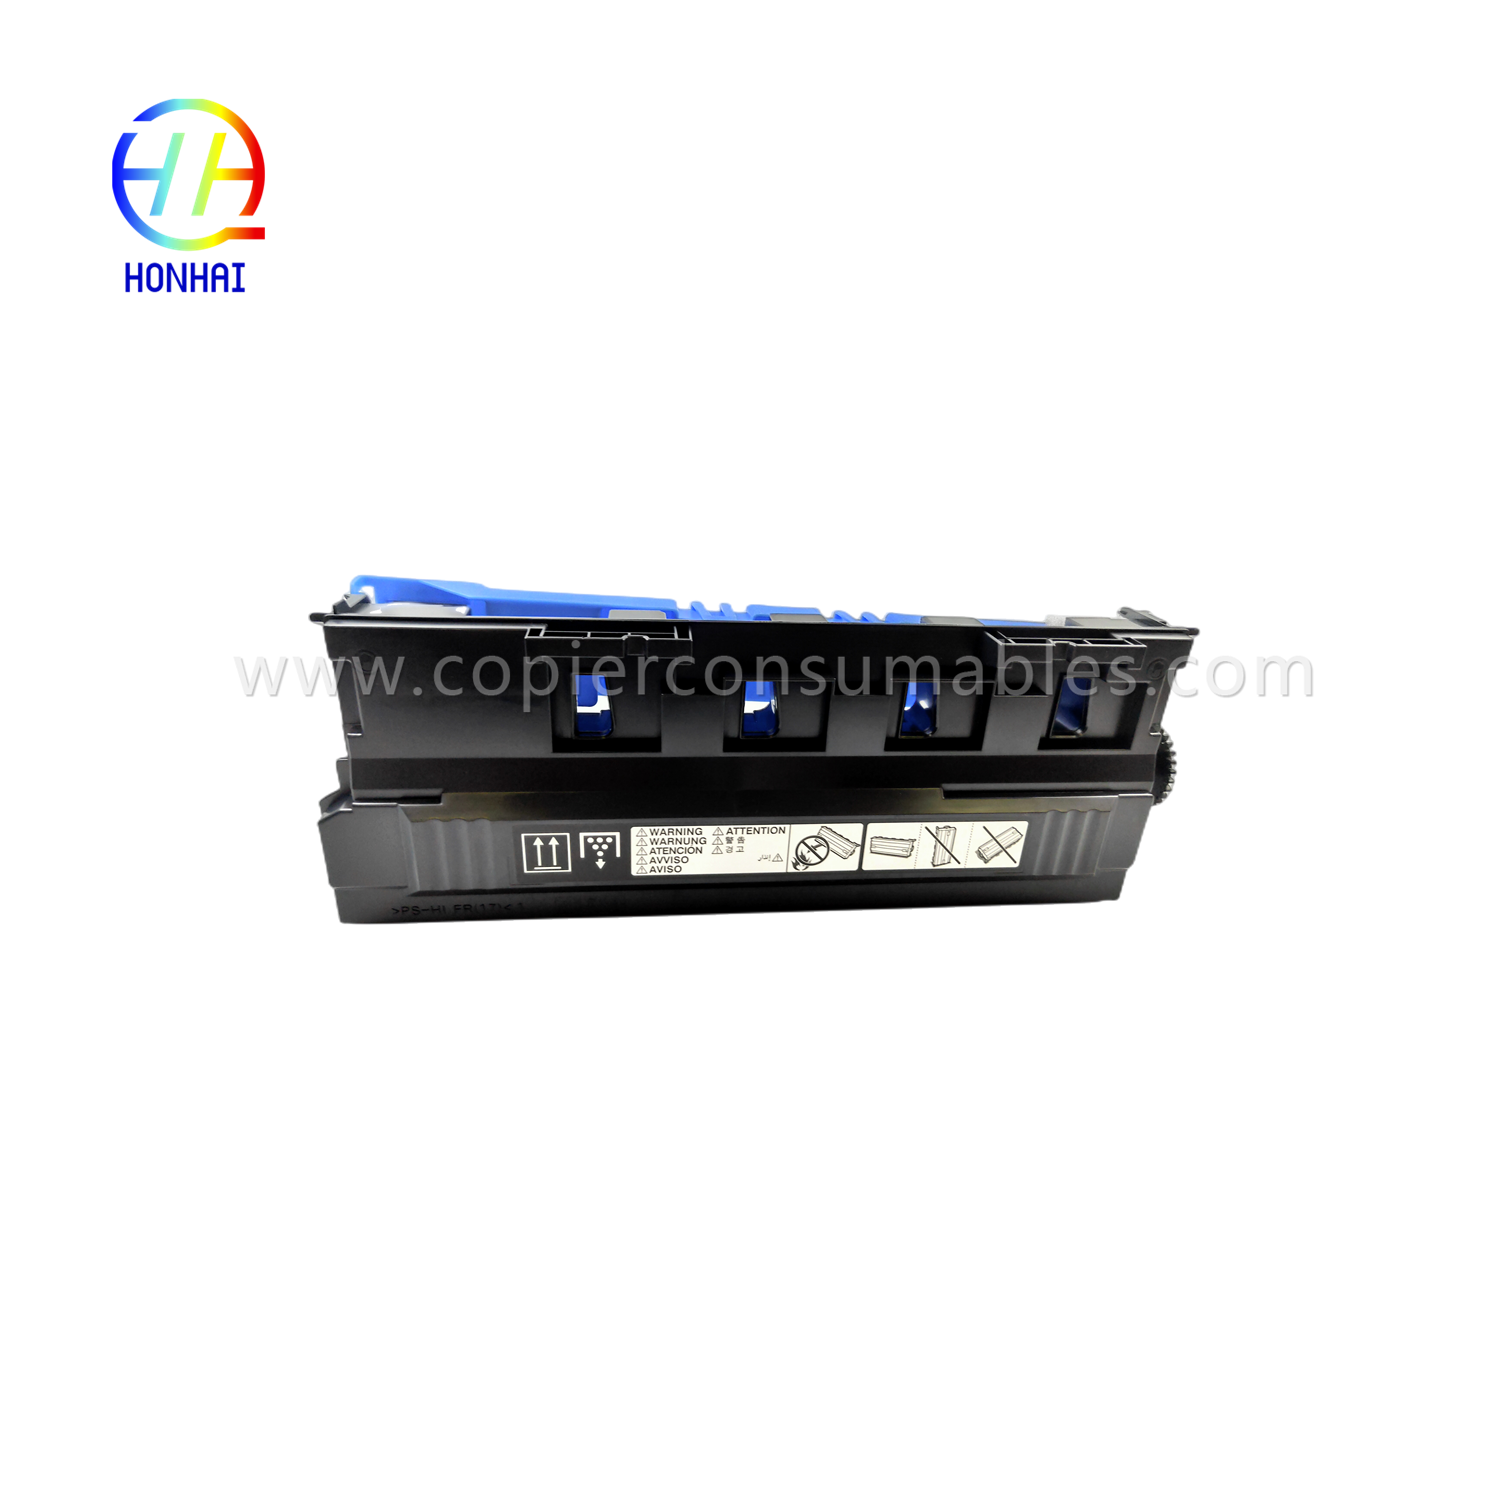 https://c585.goodao.net/waste-toner-container-for-konica-minolta-bizhub-c226-c256-c266-c227-c287-c367-c7333-c7226-c7528-wx-105-a8jjwy1-waste-toner-box-product/